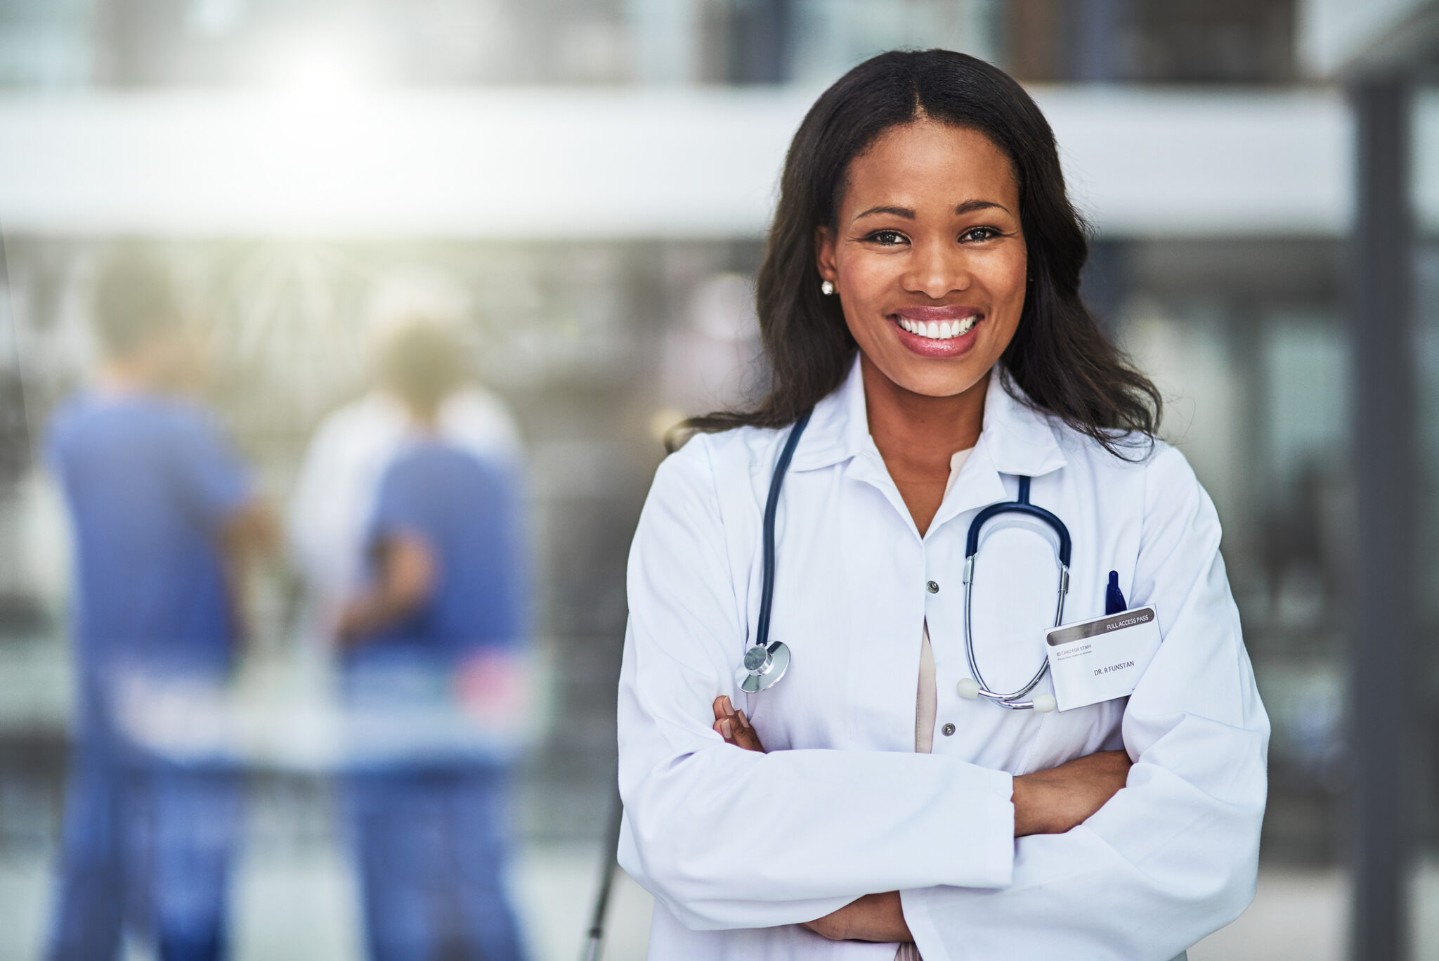 Portrait of a confident African-American female doctor working at a hospital